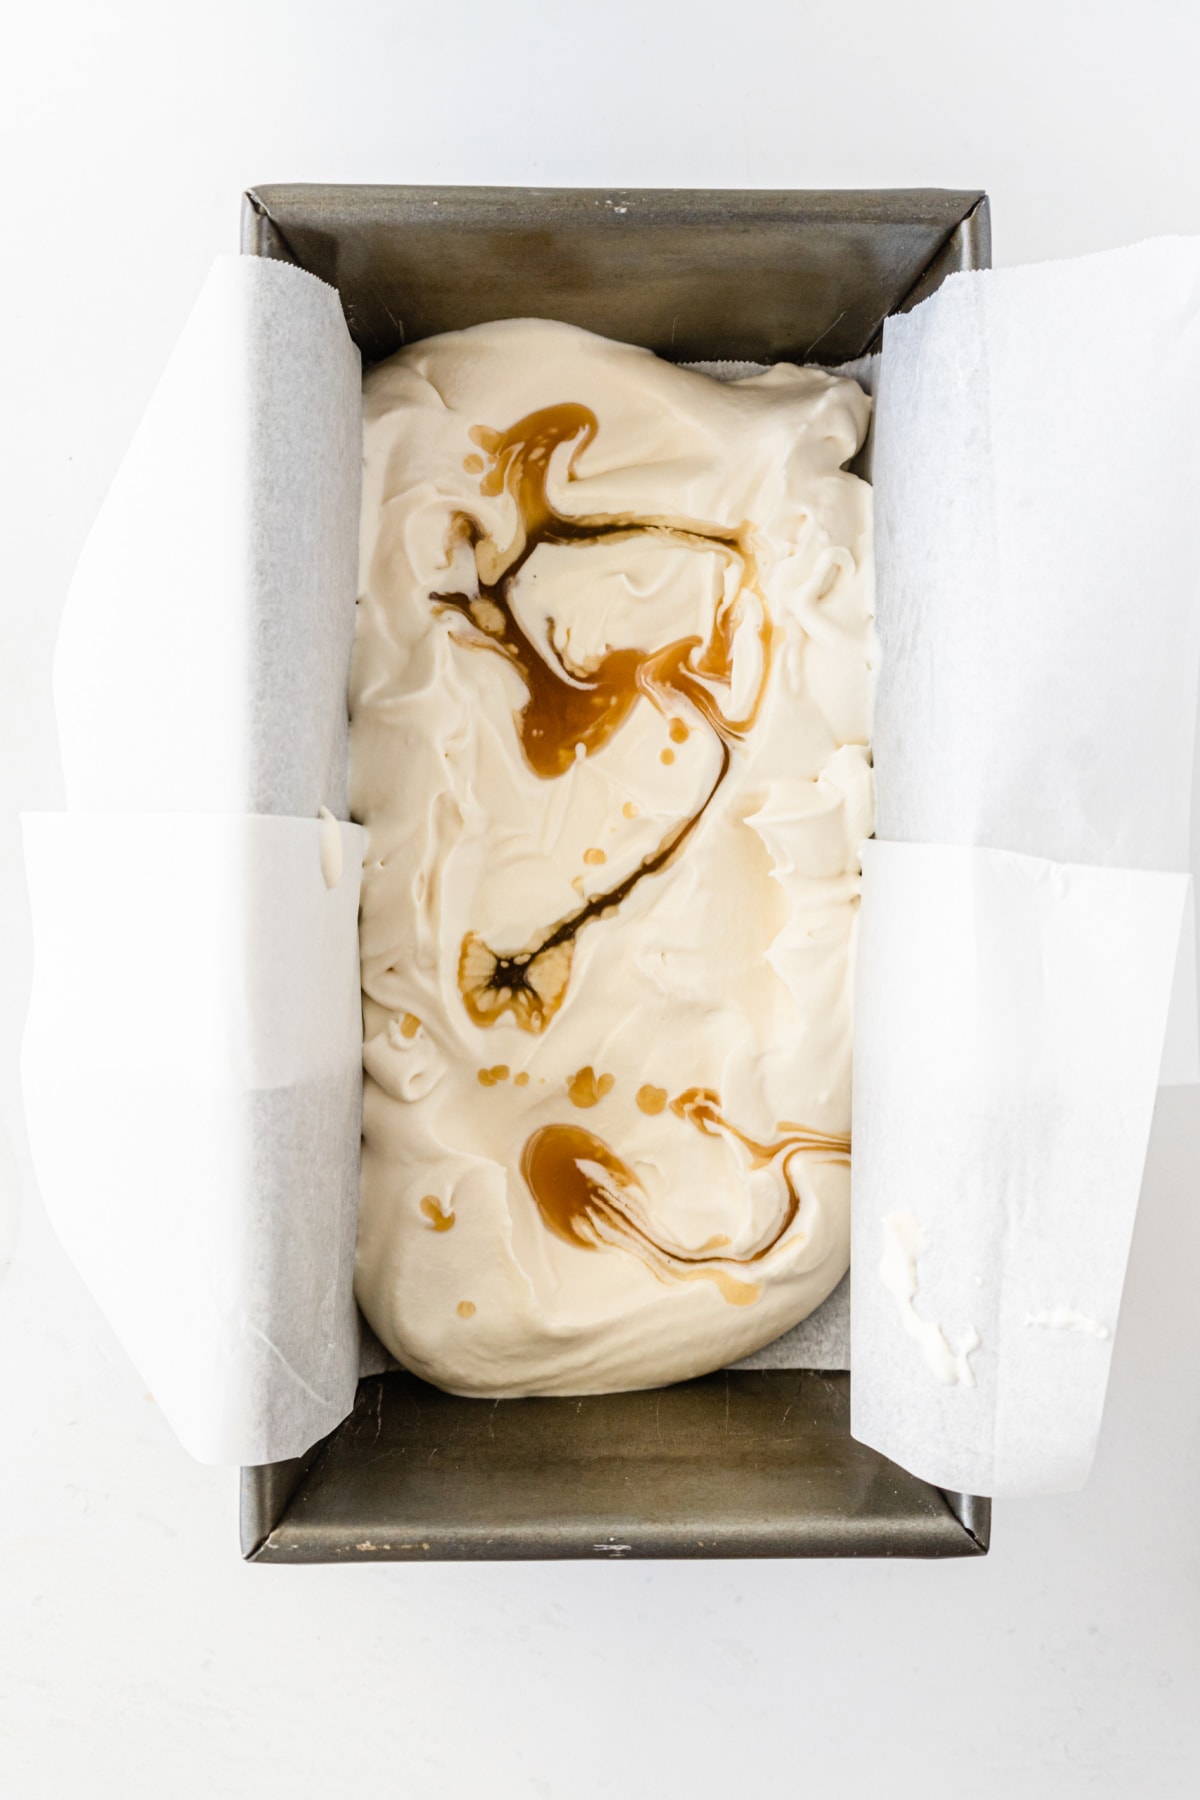 Ice cream mixture with butterscotch sauce